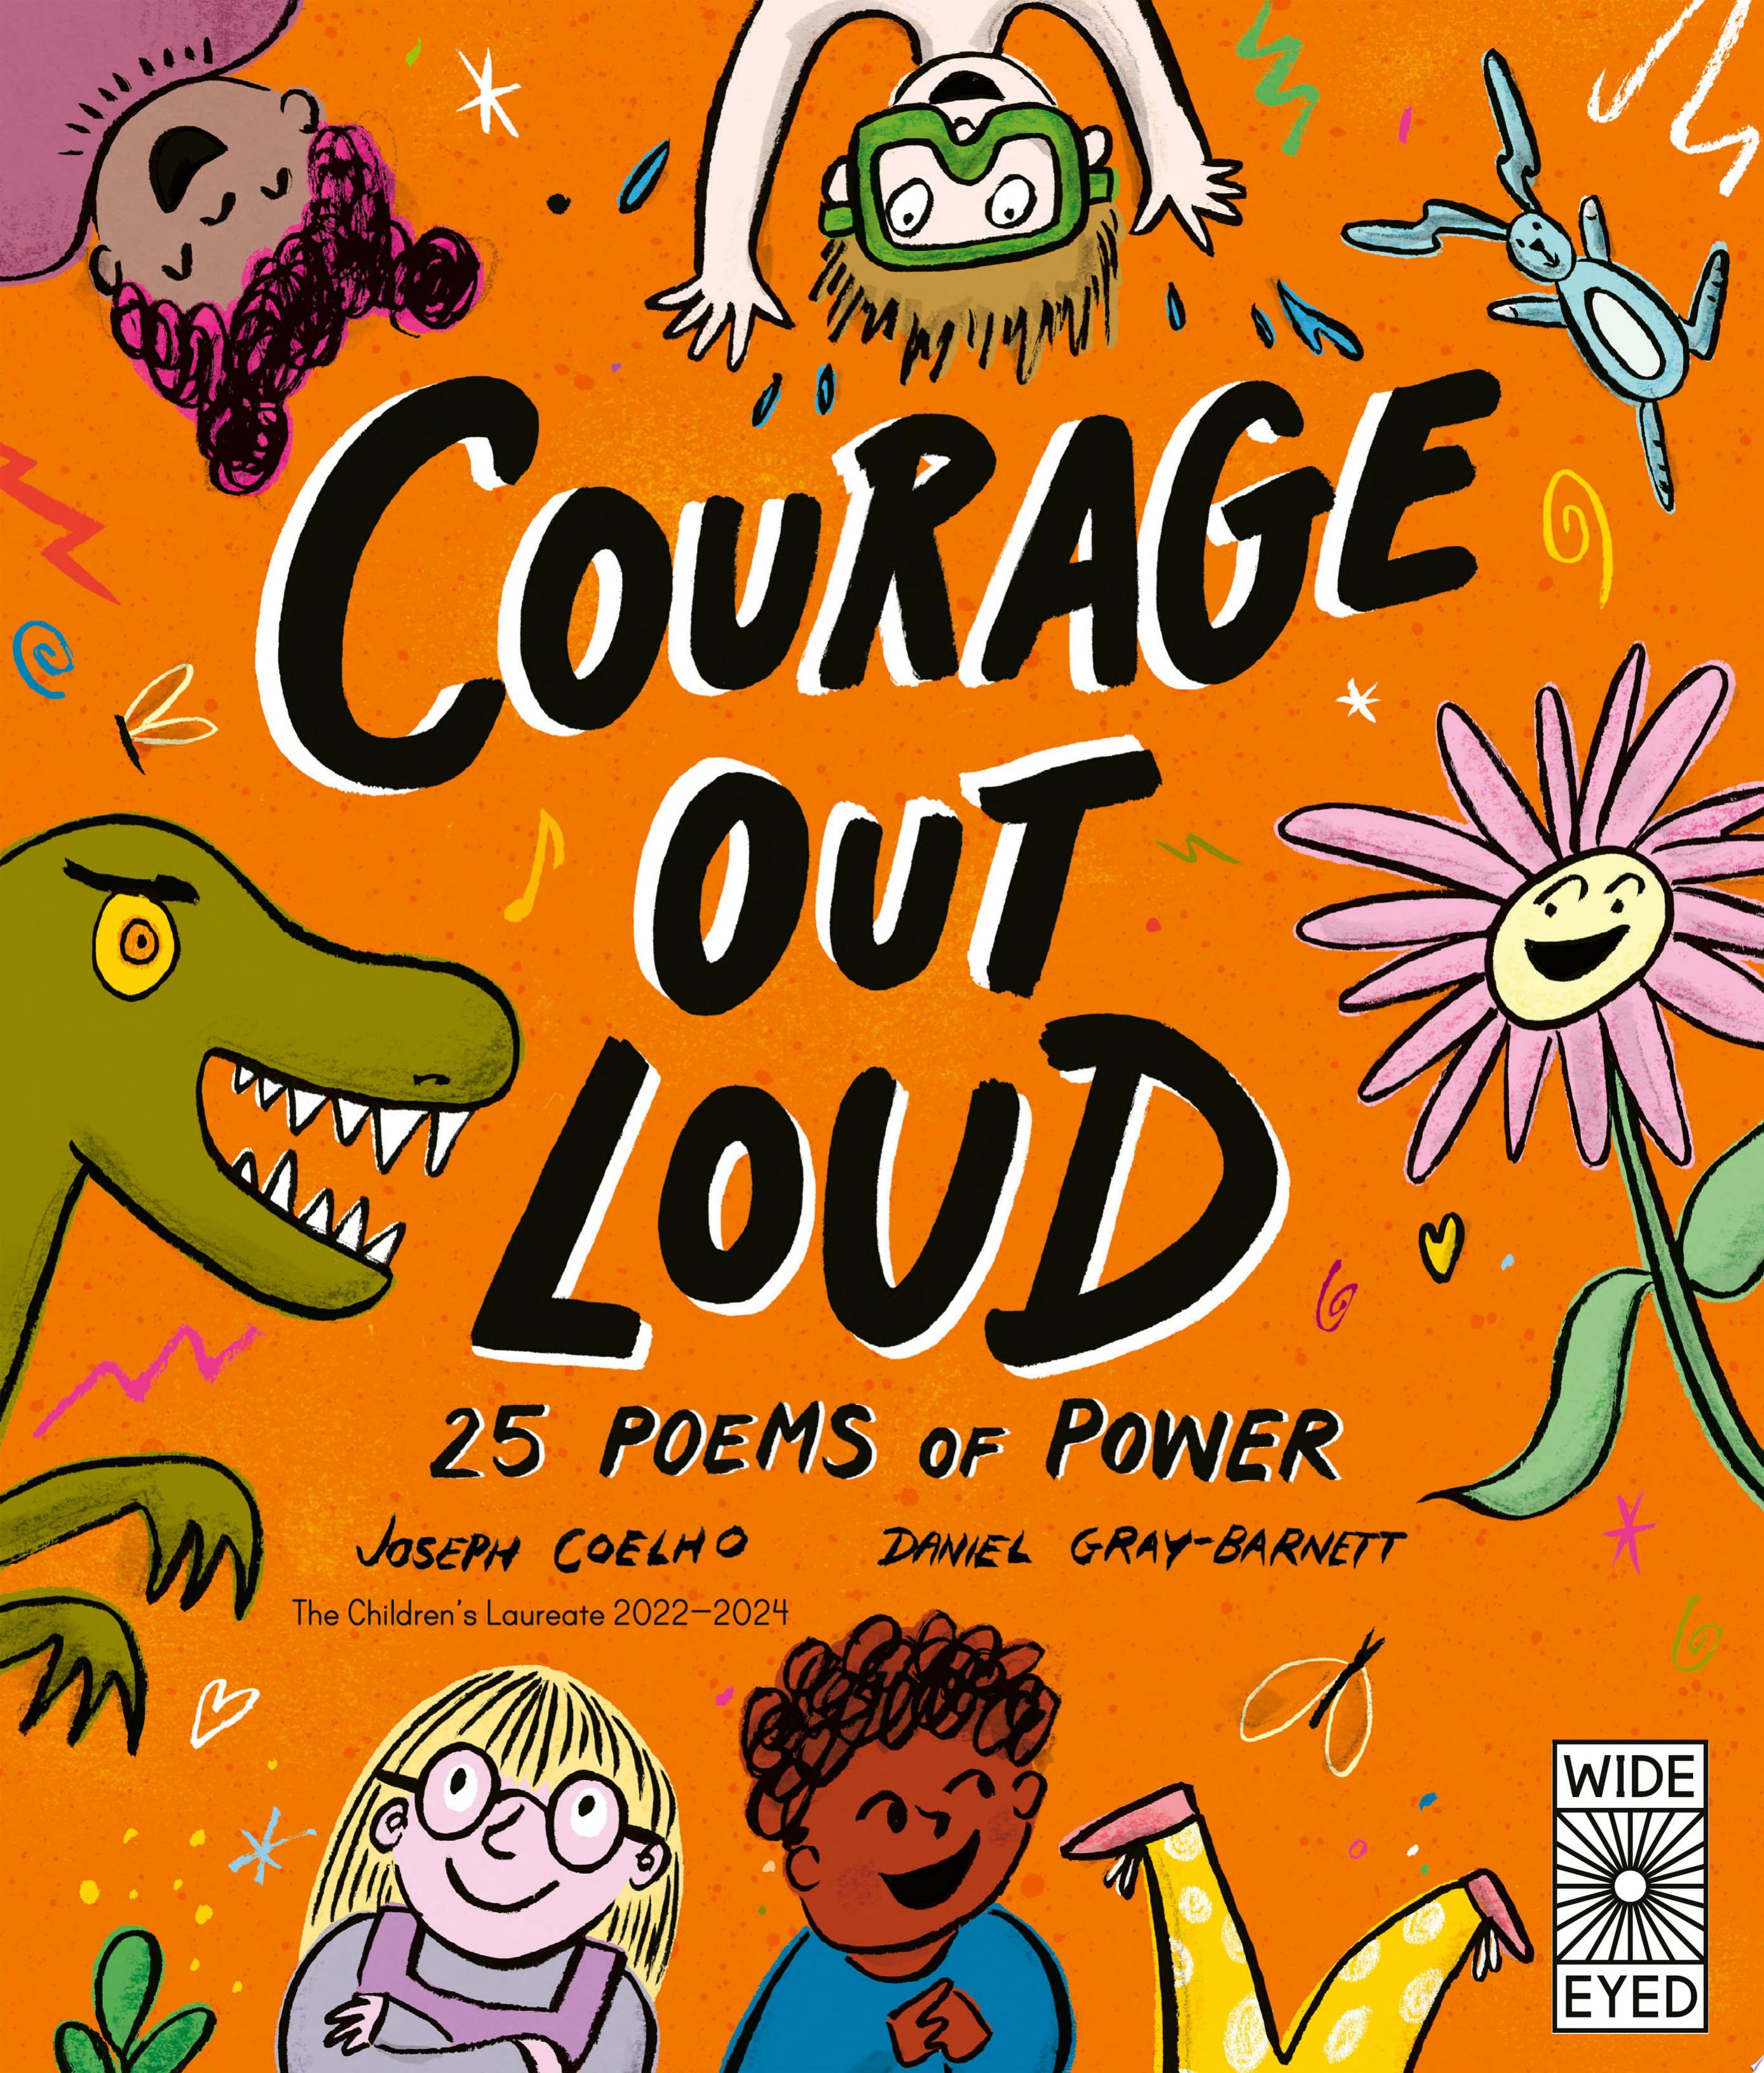 Image for "Courage Out Loud"